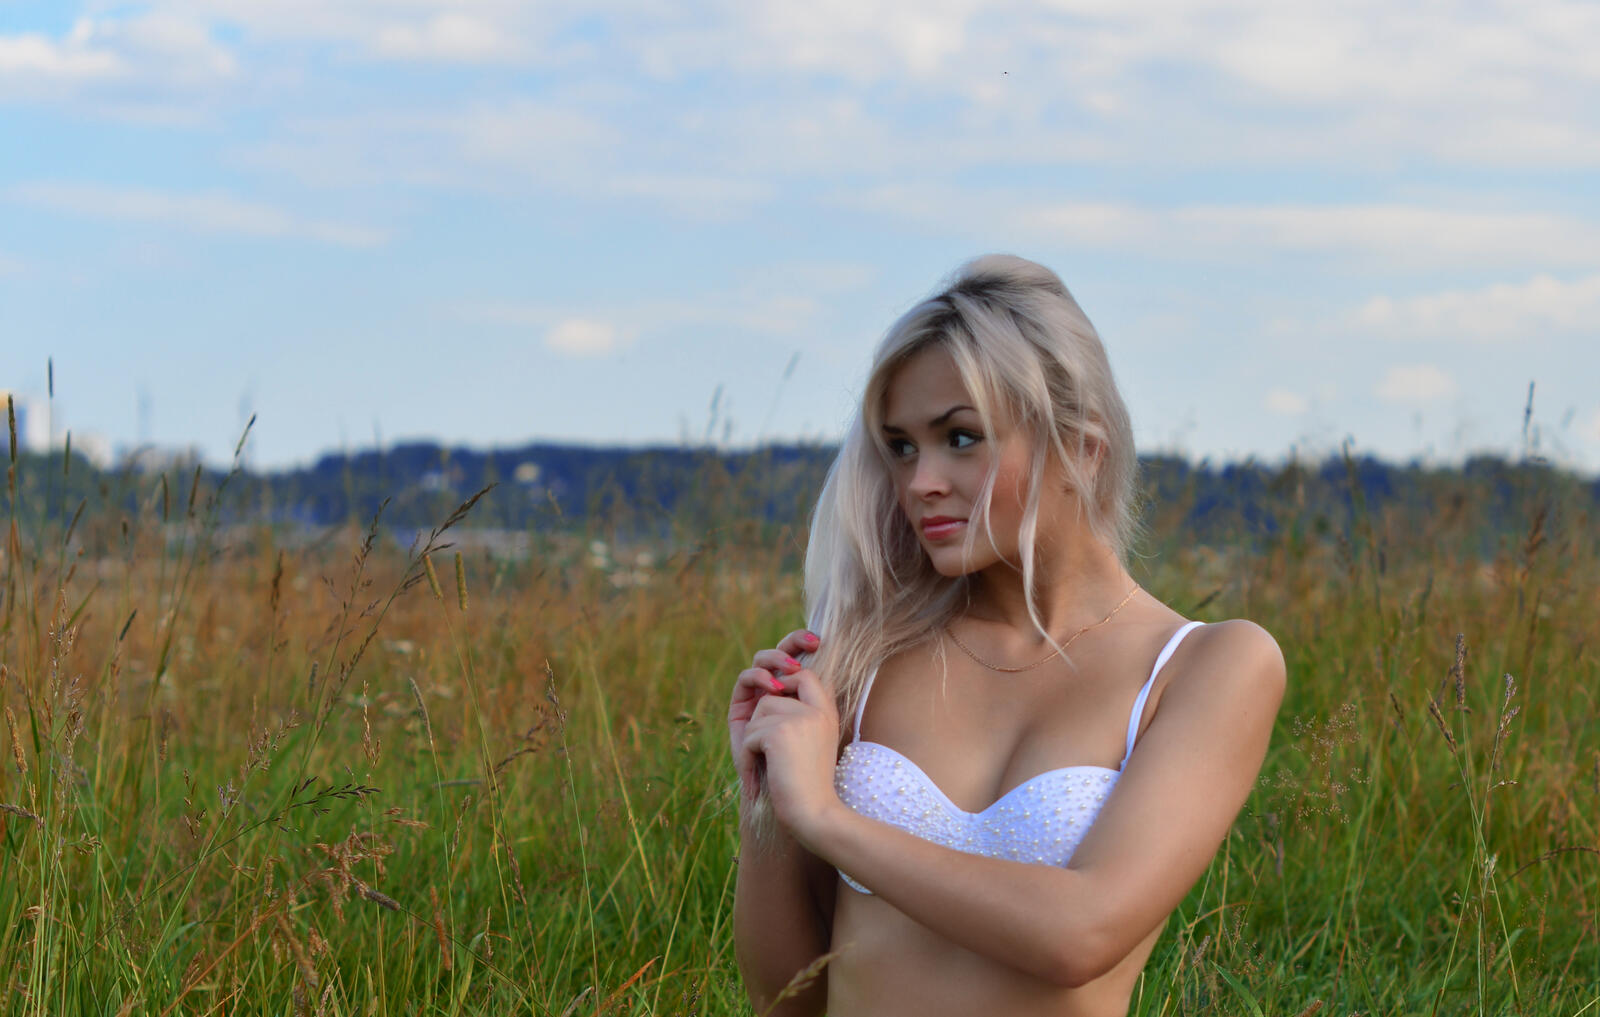 Wallpapers girl nature blond on the desktop